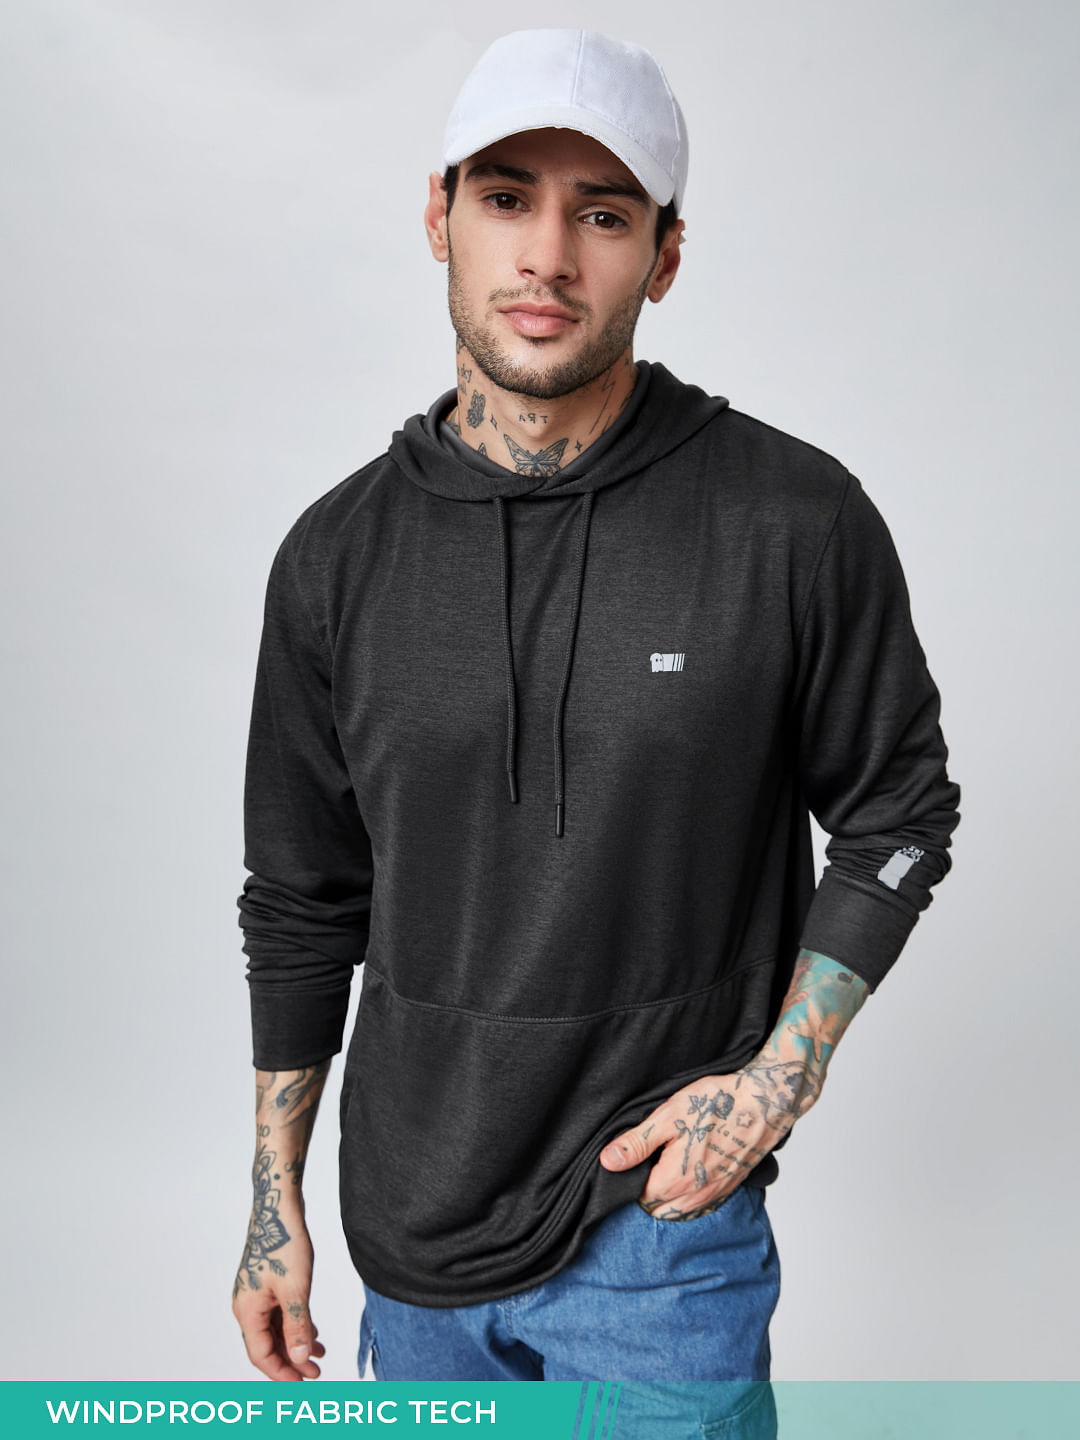 Buy All Weather Hoodies for men at The Souled Store